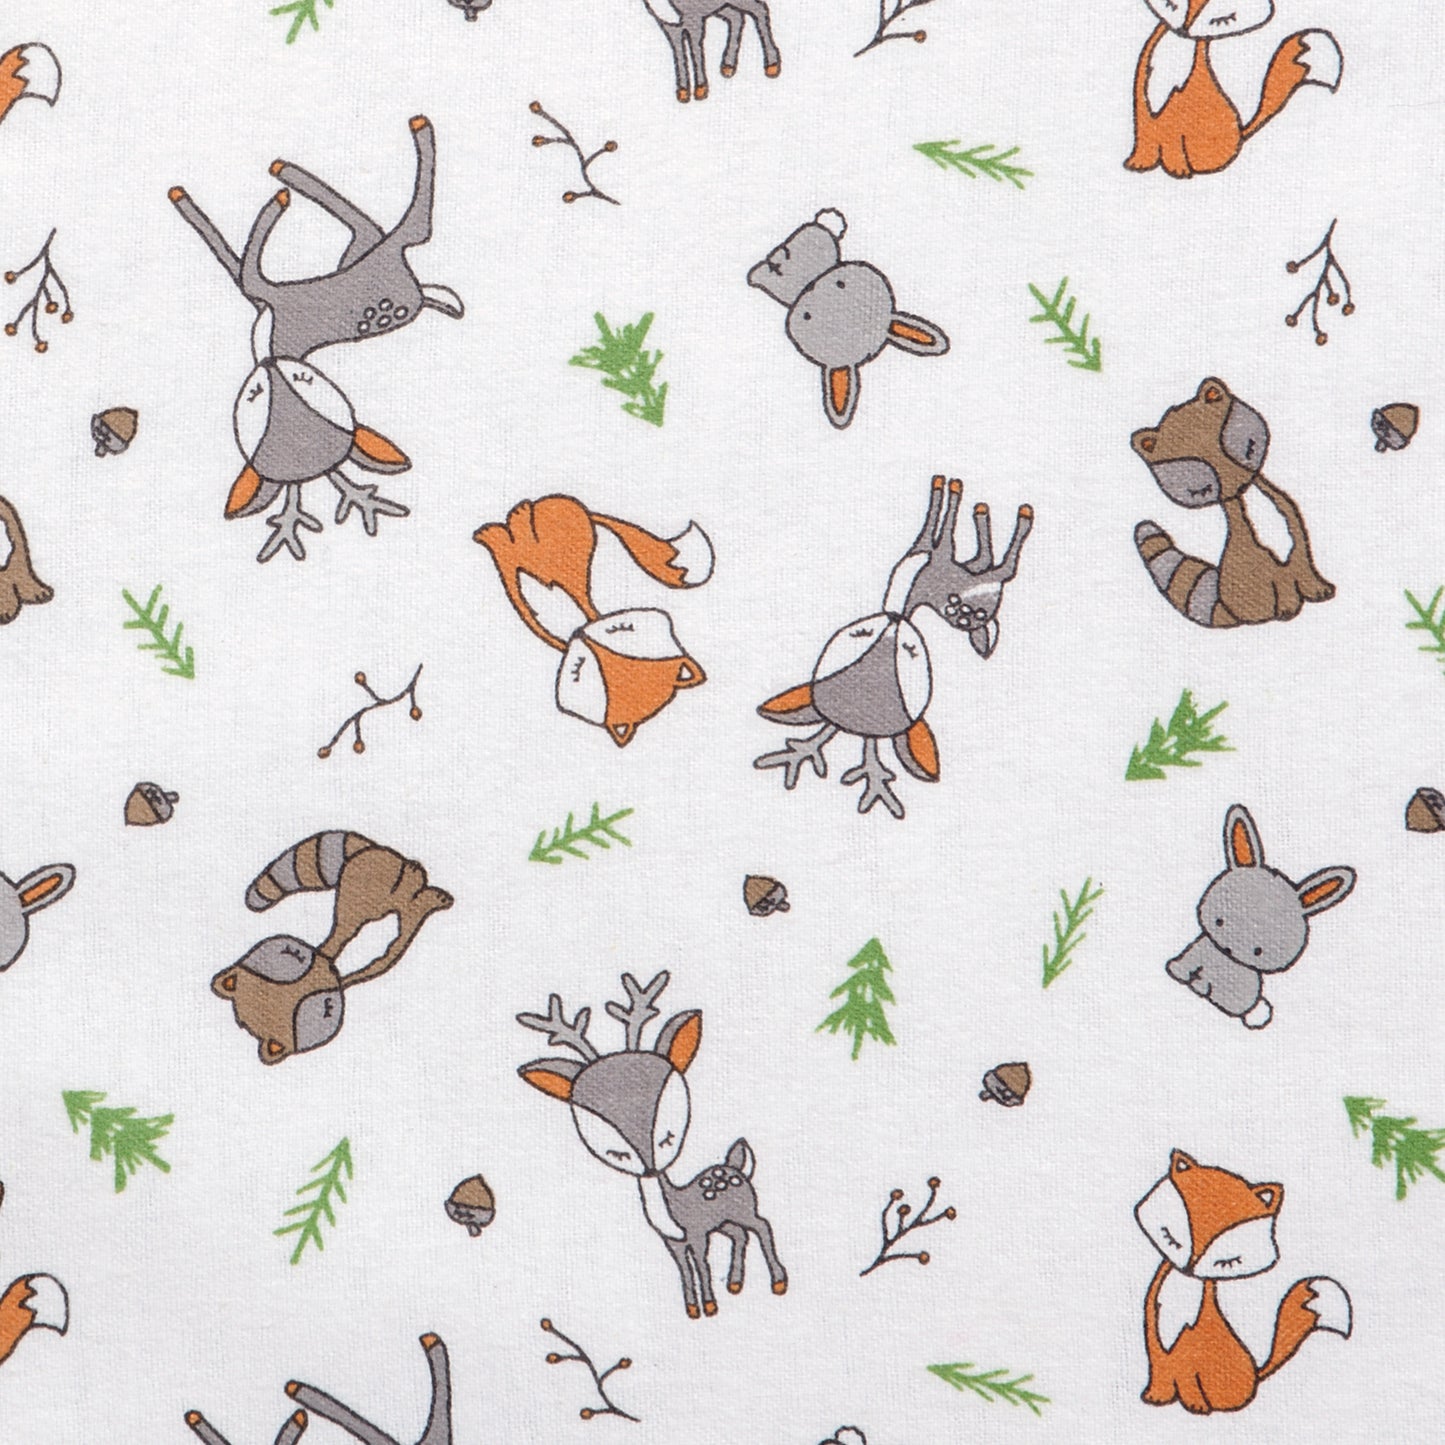  Forest Nap Deluxe Flannel Fitted Crib Sheet - swatch view